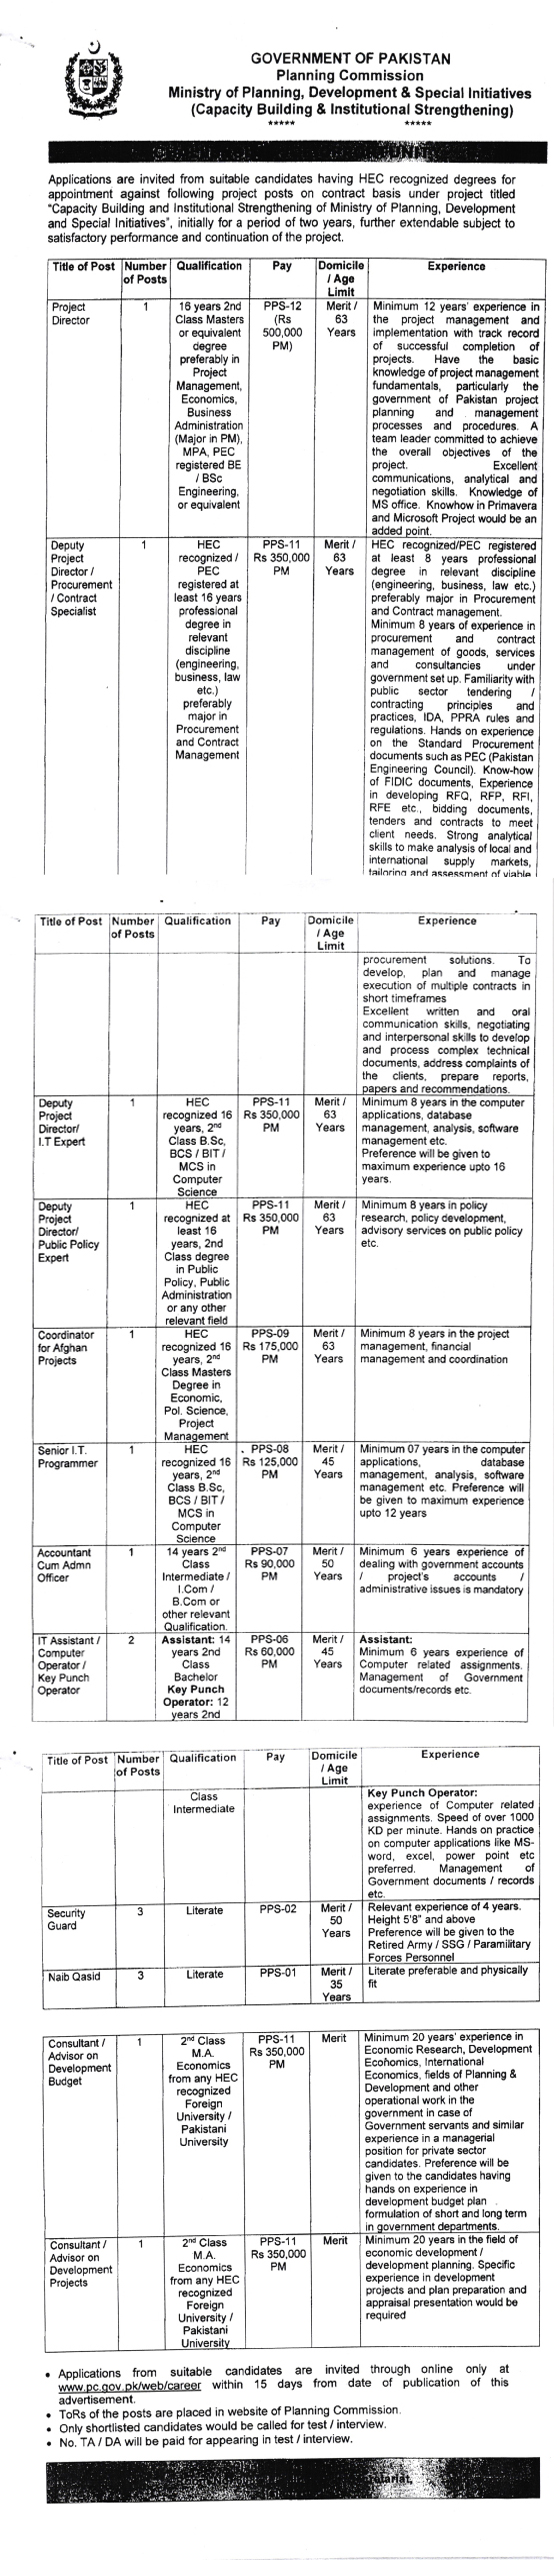 Ministry of Planning and Development Jobs 2021 – Application Form